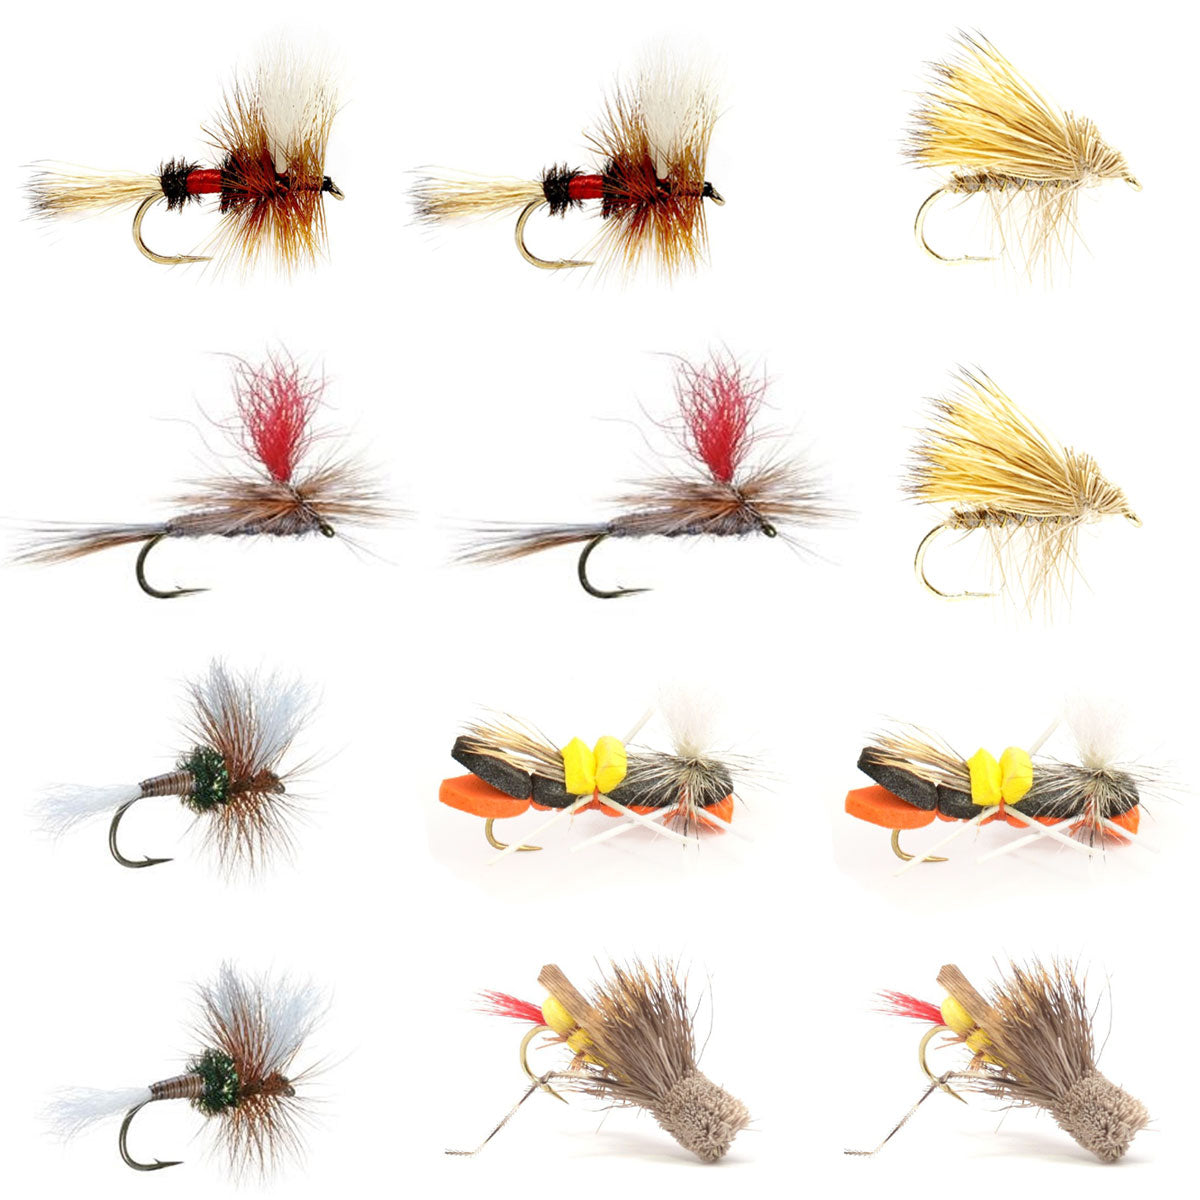  40 Premium Hand Tied Fly Fishing Flies Assortment | Fly Box Included |  Dry, Wet, Nymphs, Streamers, Wooly Buggers, Terrestrials | Trout, Bass Lure